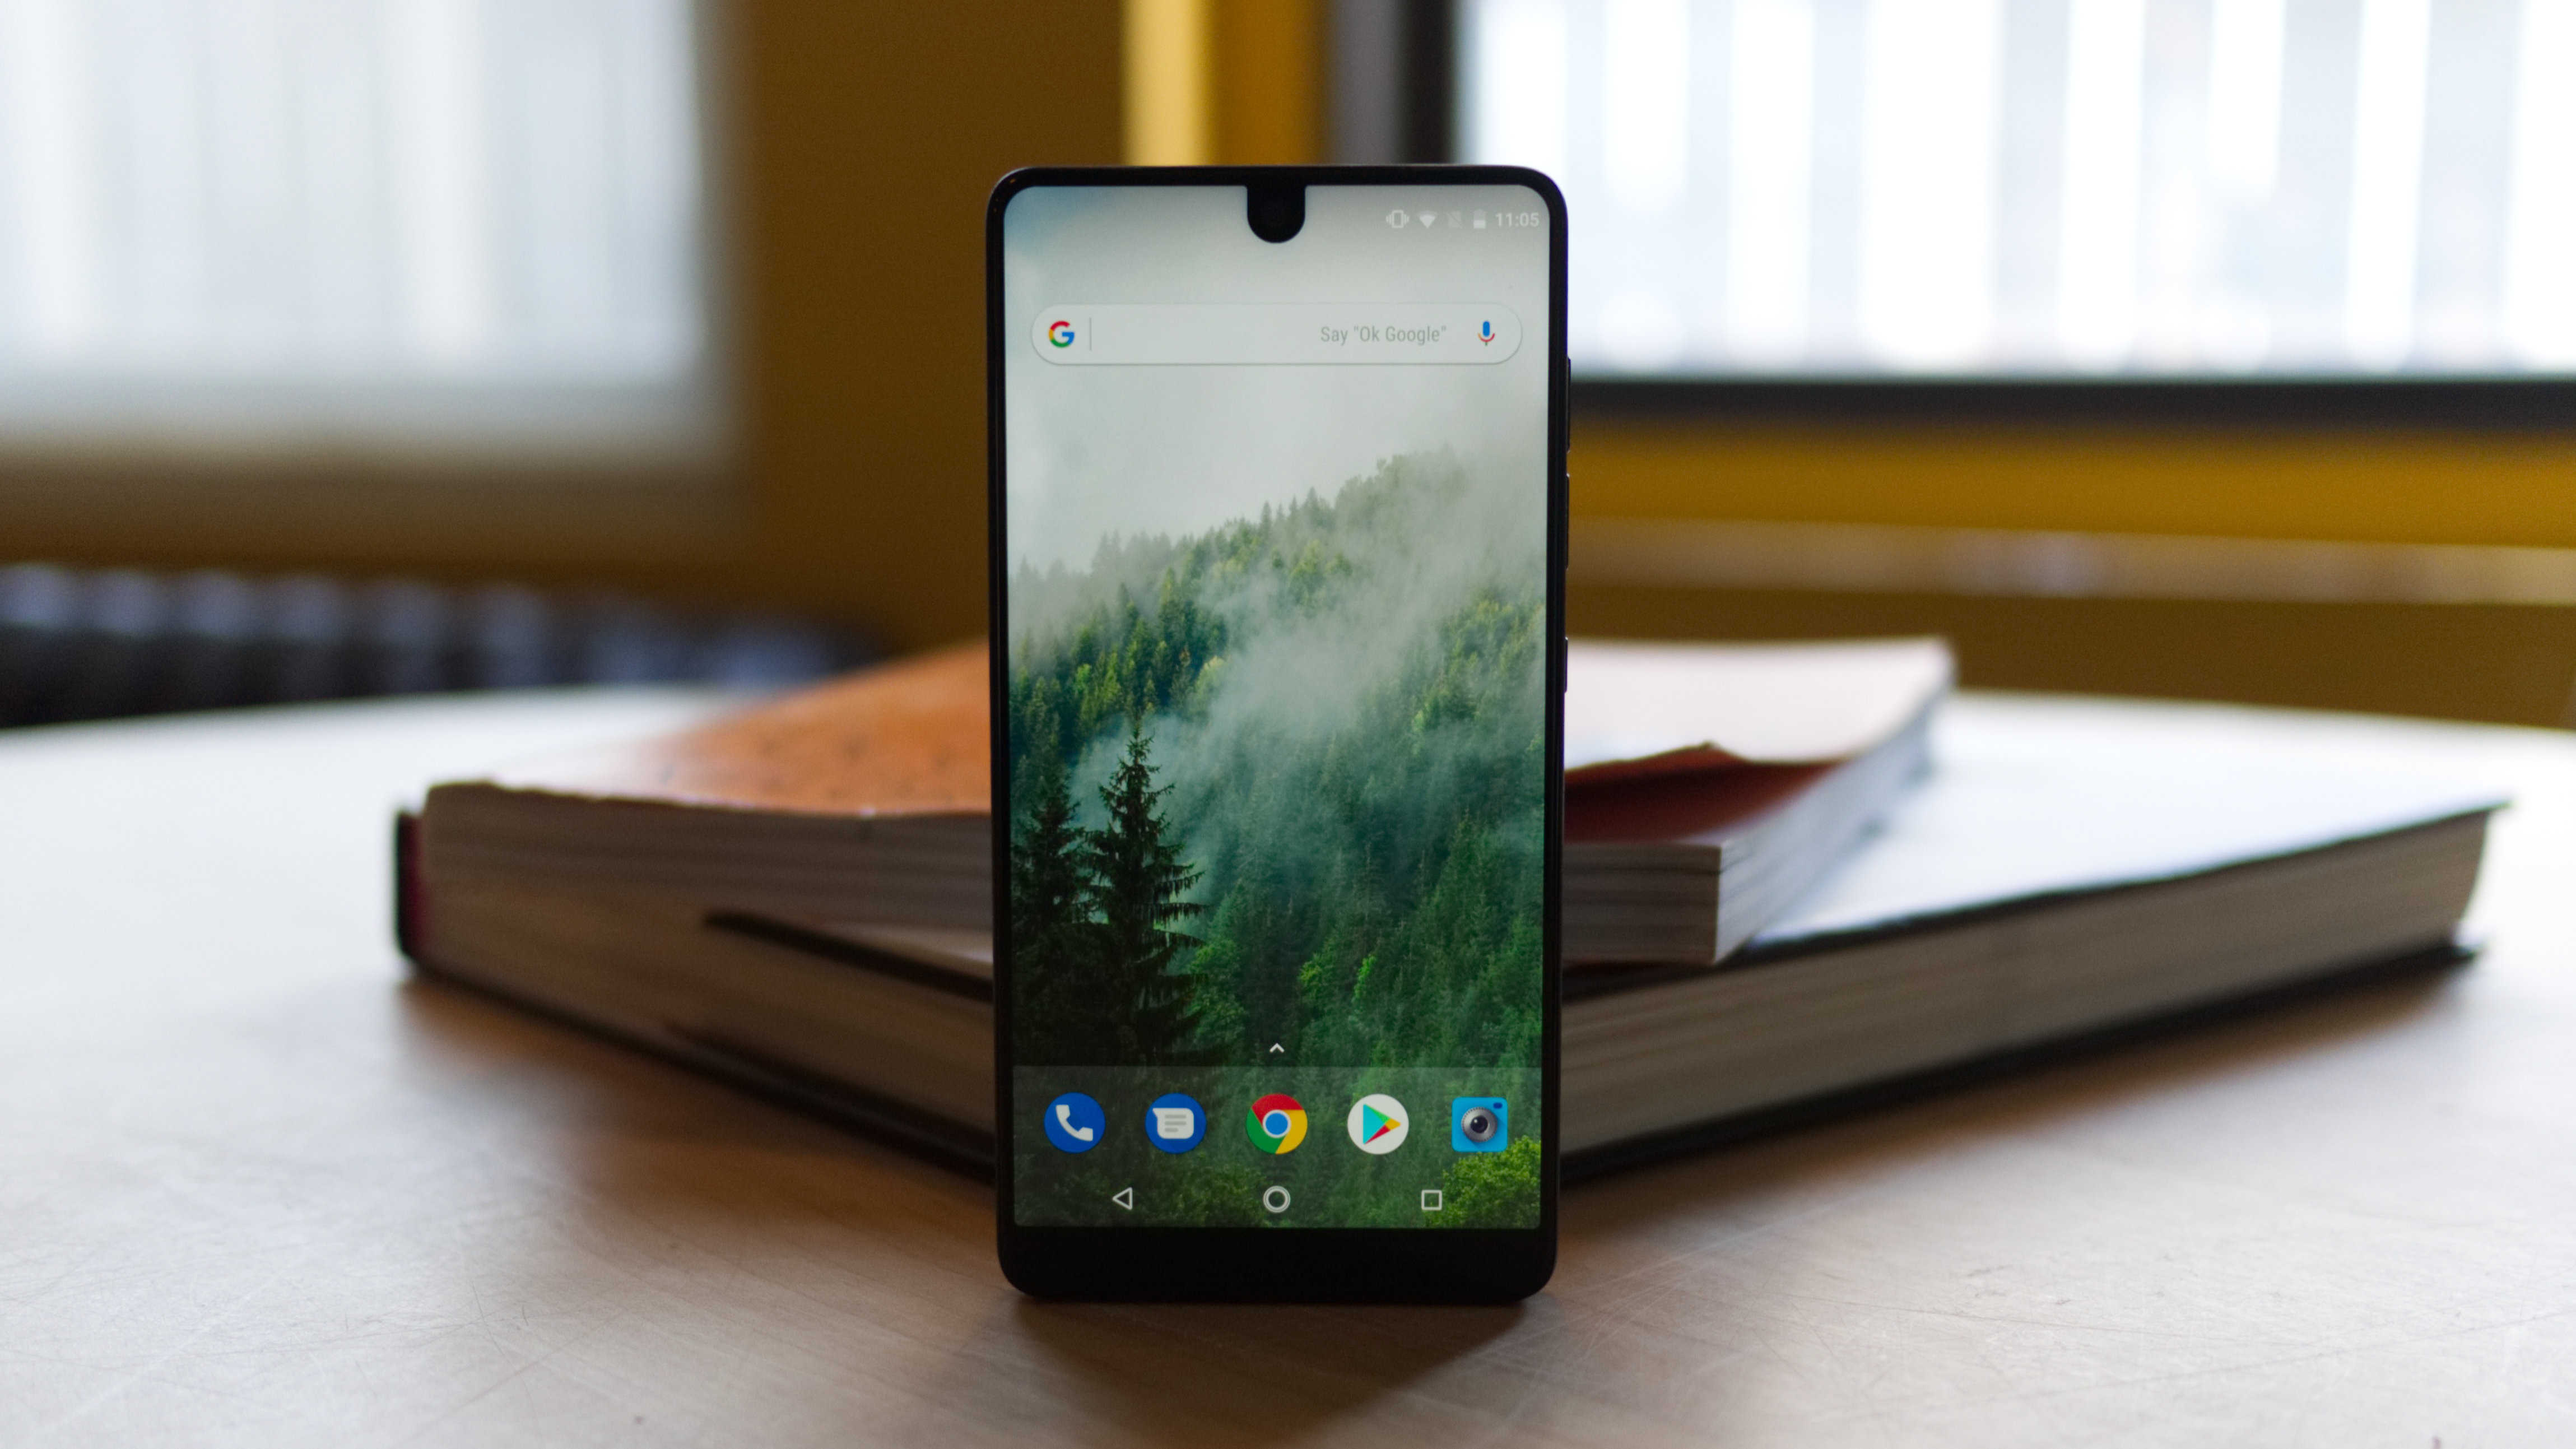 It's the end of the road for the Essential phone, but a successor is